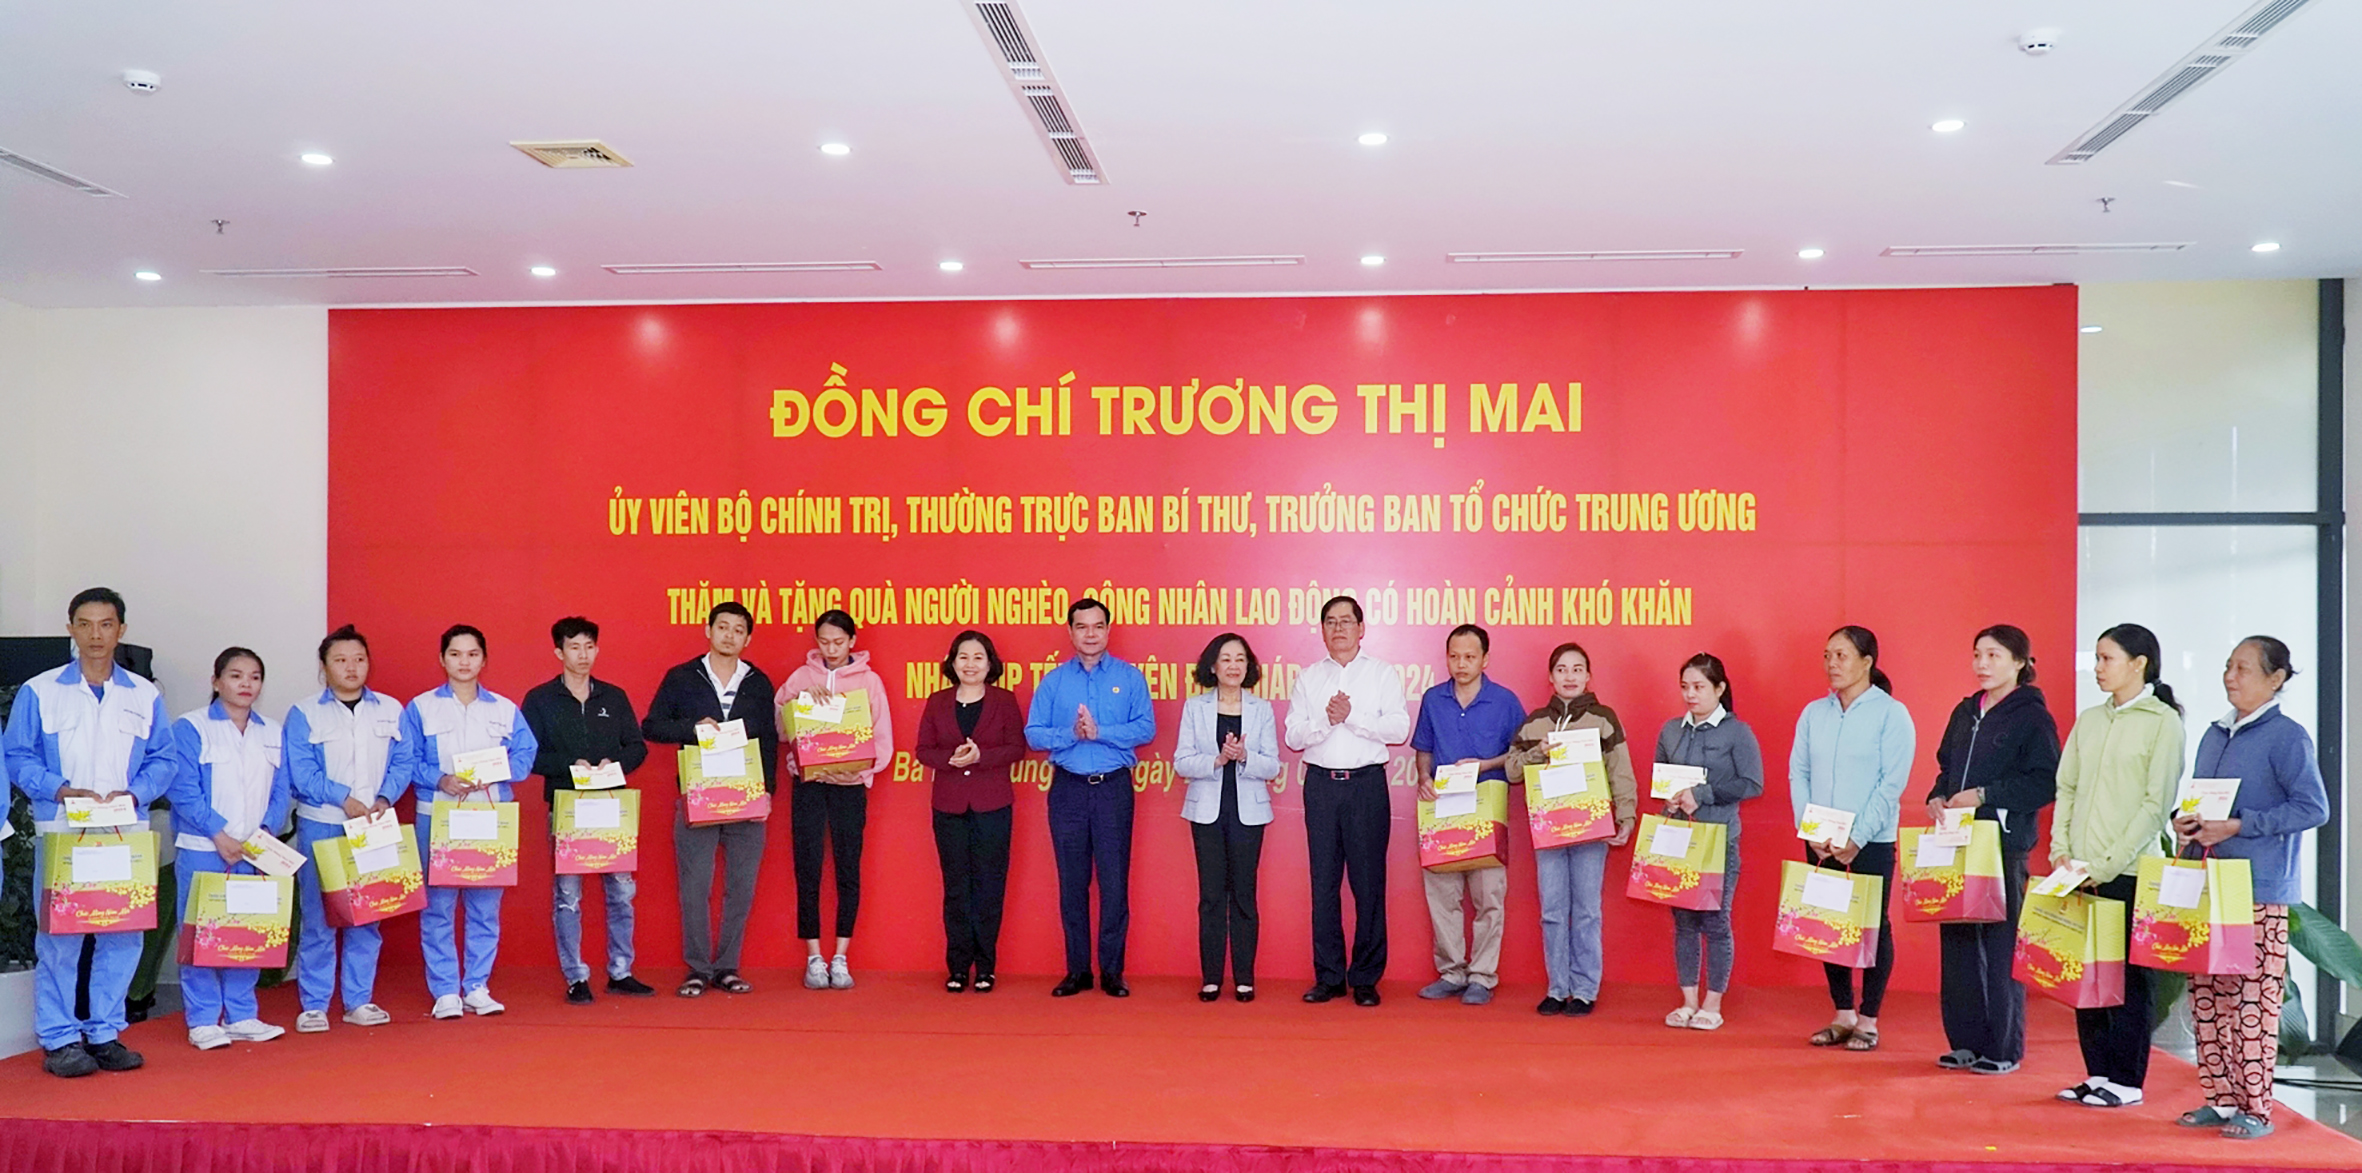 Member of the Politburo, Permanent Member of the Secretariat - Truong Thi Mai visited and presented gifts to Ba Ria - Vung Tau workers.